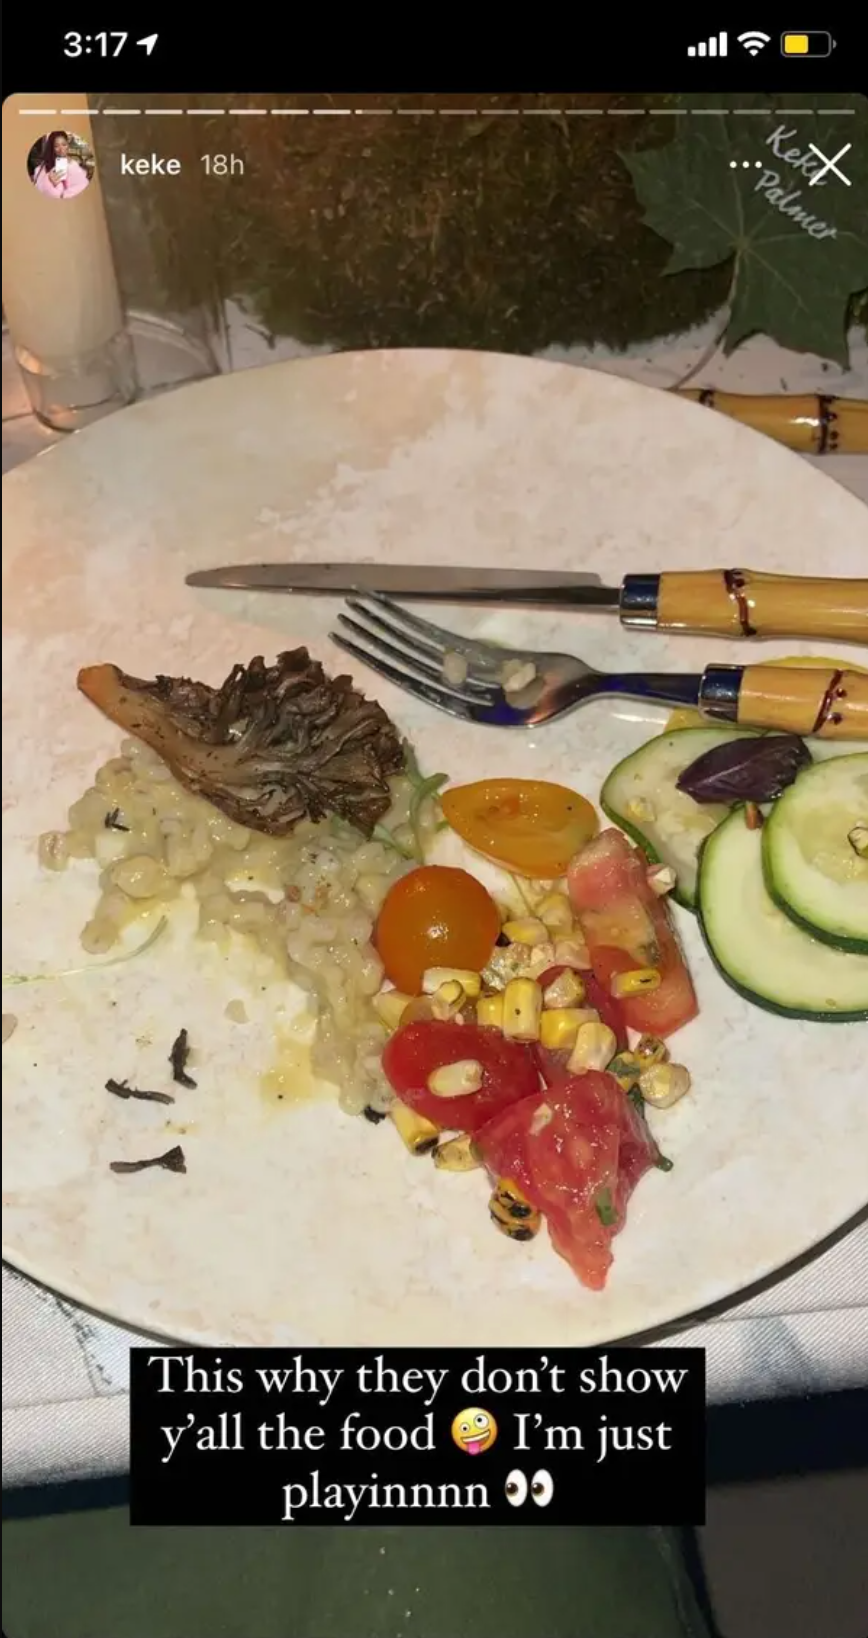 Screenshot of an Instagram story from Keke Palmer featuring a photo of a plate of meat and veggies and the caption "This why they don't show y'all the food...I'm just playinnnn"